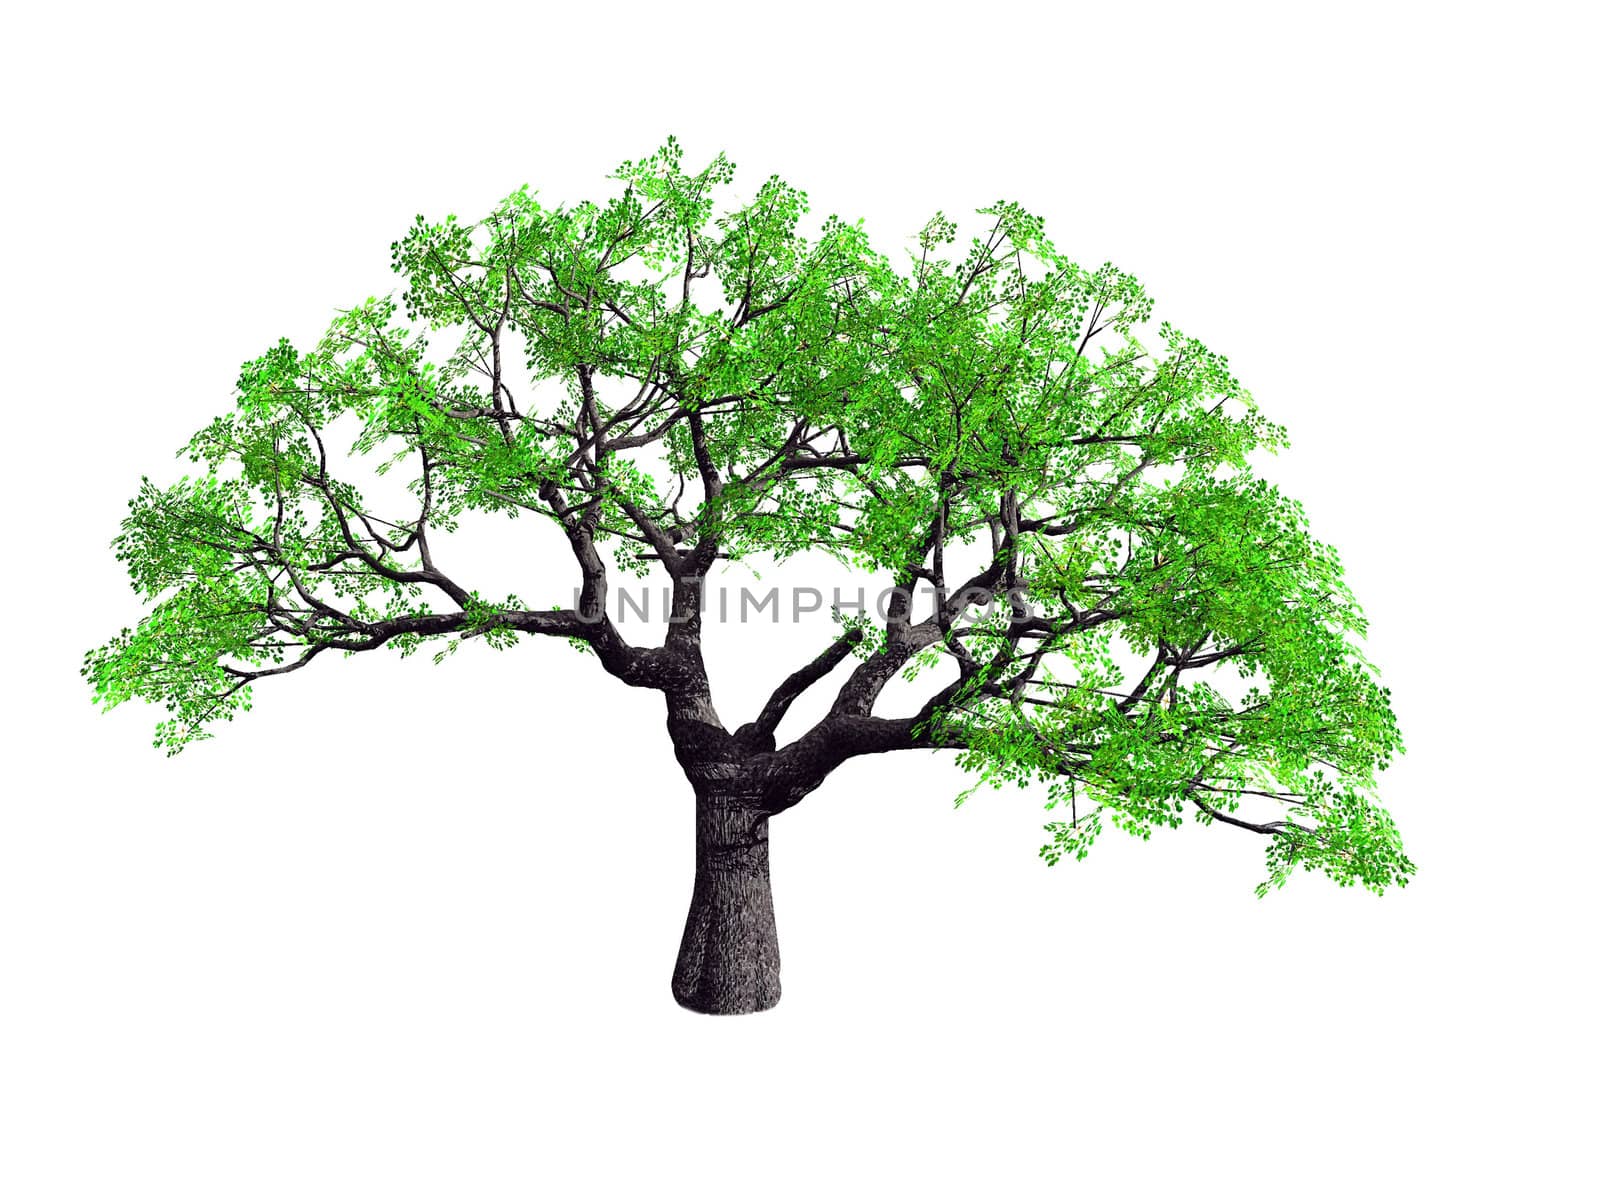 the tree on a white background